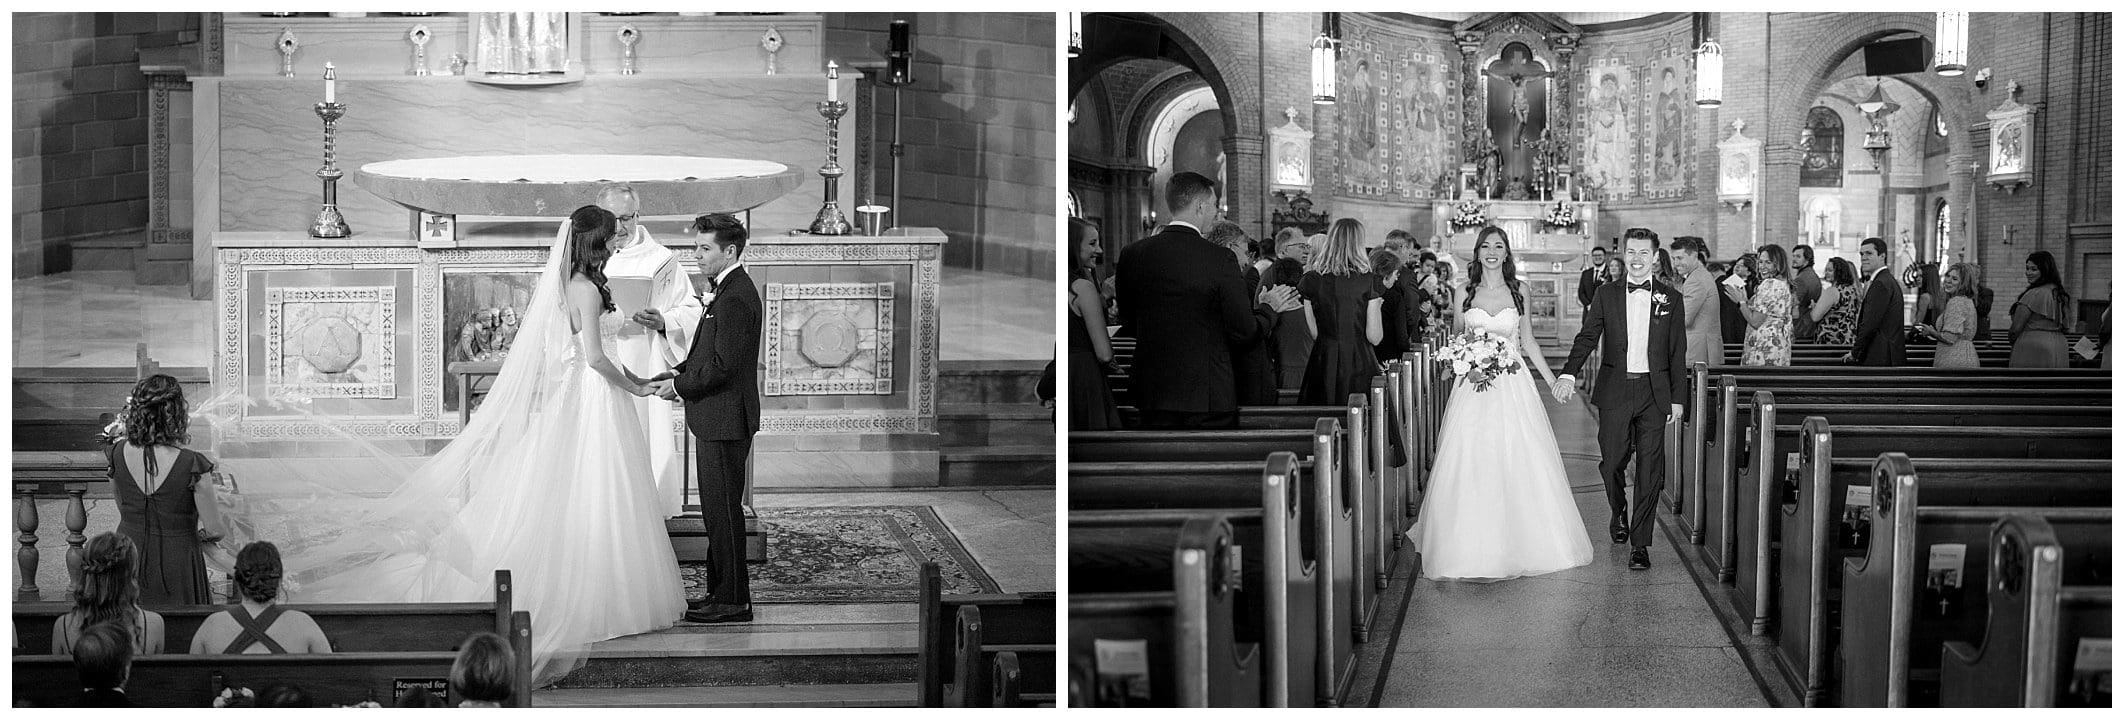 black and white photo of bride and groom at basilica of st lawrence wedding 